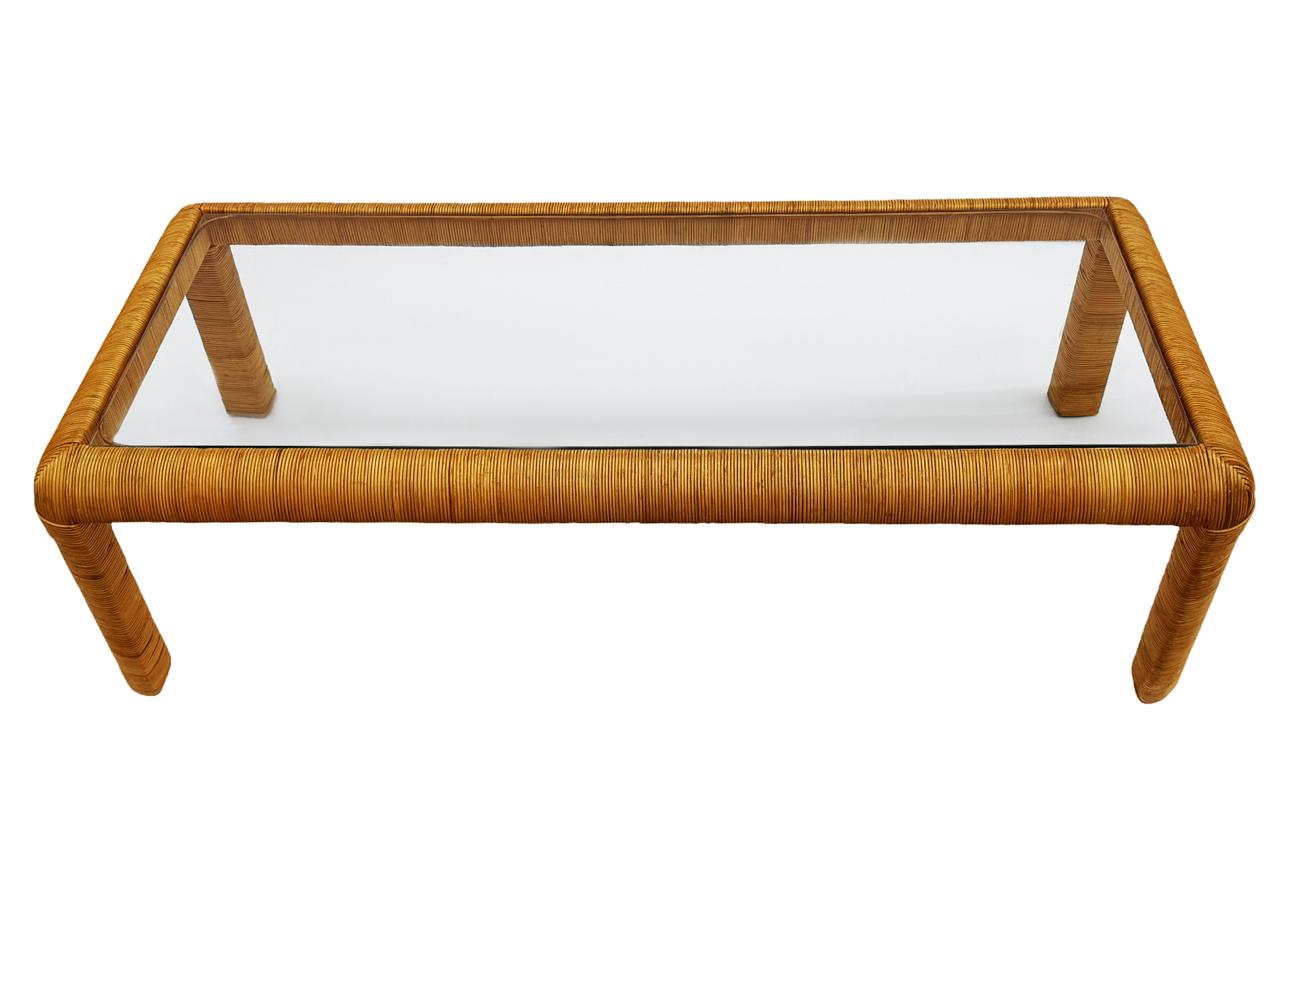 A long rectangular coffee table circa 1970's in the style of Paul Frankl. It features a curved rattan frame with a clear glass inlayed top. Clean ready to use condition.